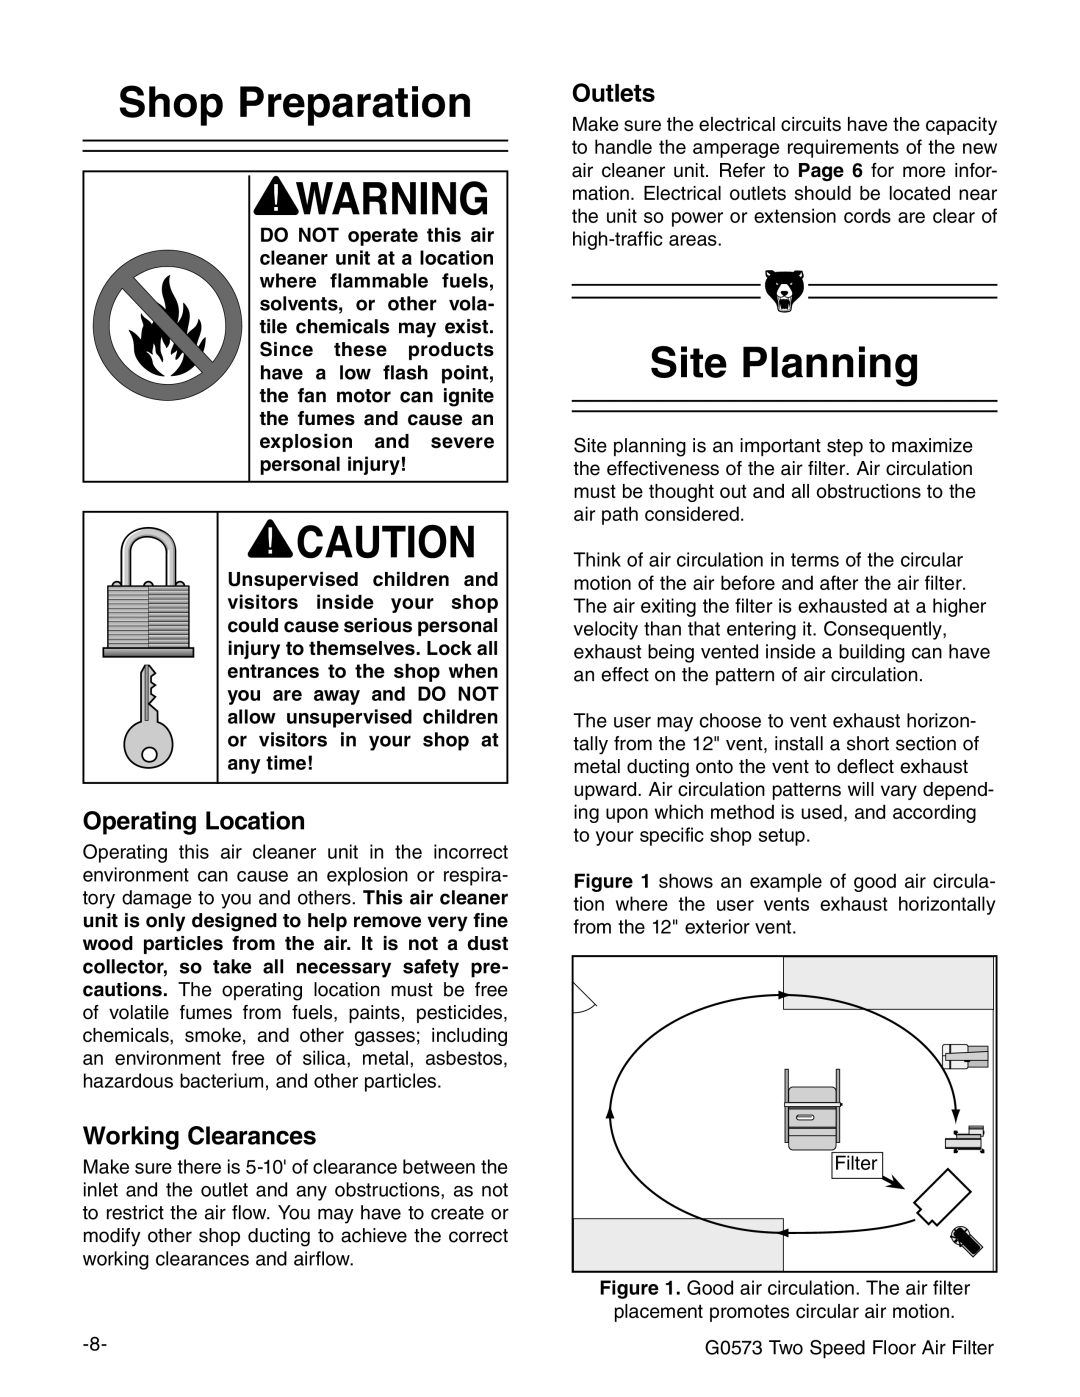 Grizzly G0573 instruction manual Shop Preparation, Site Planning, Operating Location, Working Clearances, Outlets 